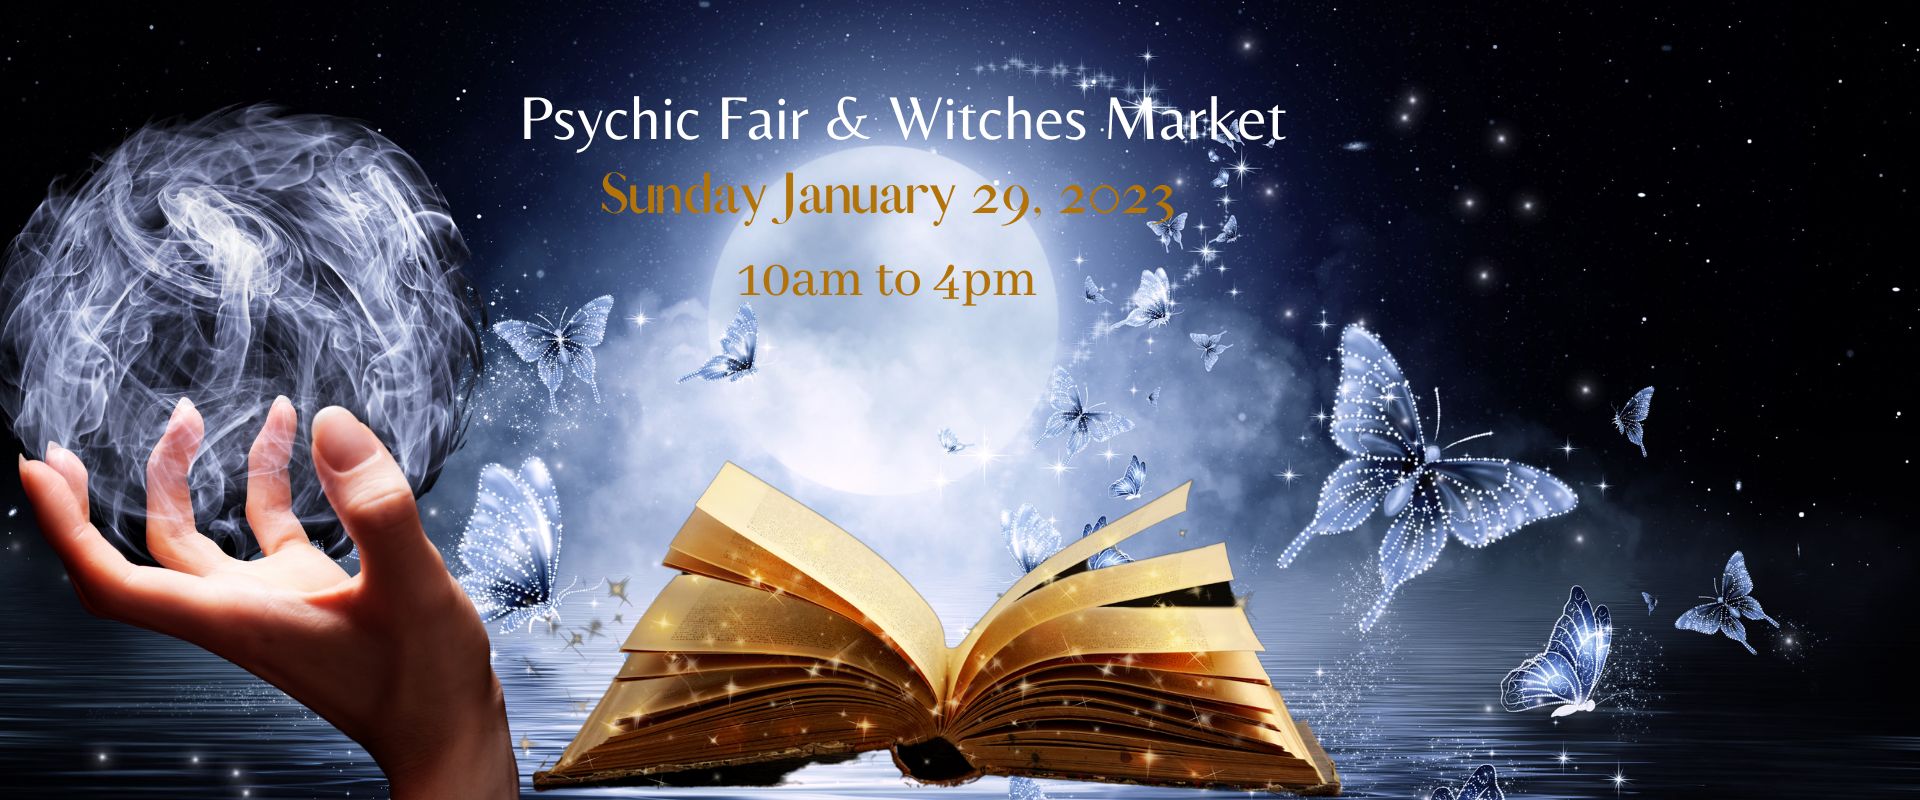 Psychic Fair & Witches Market